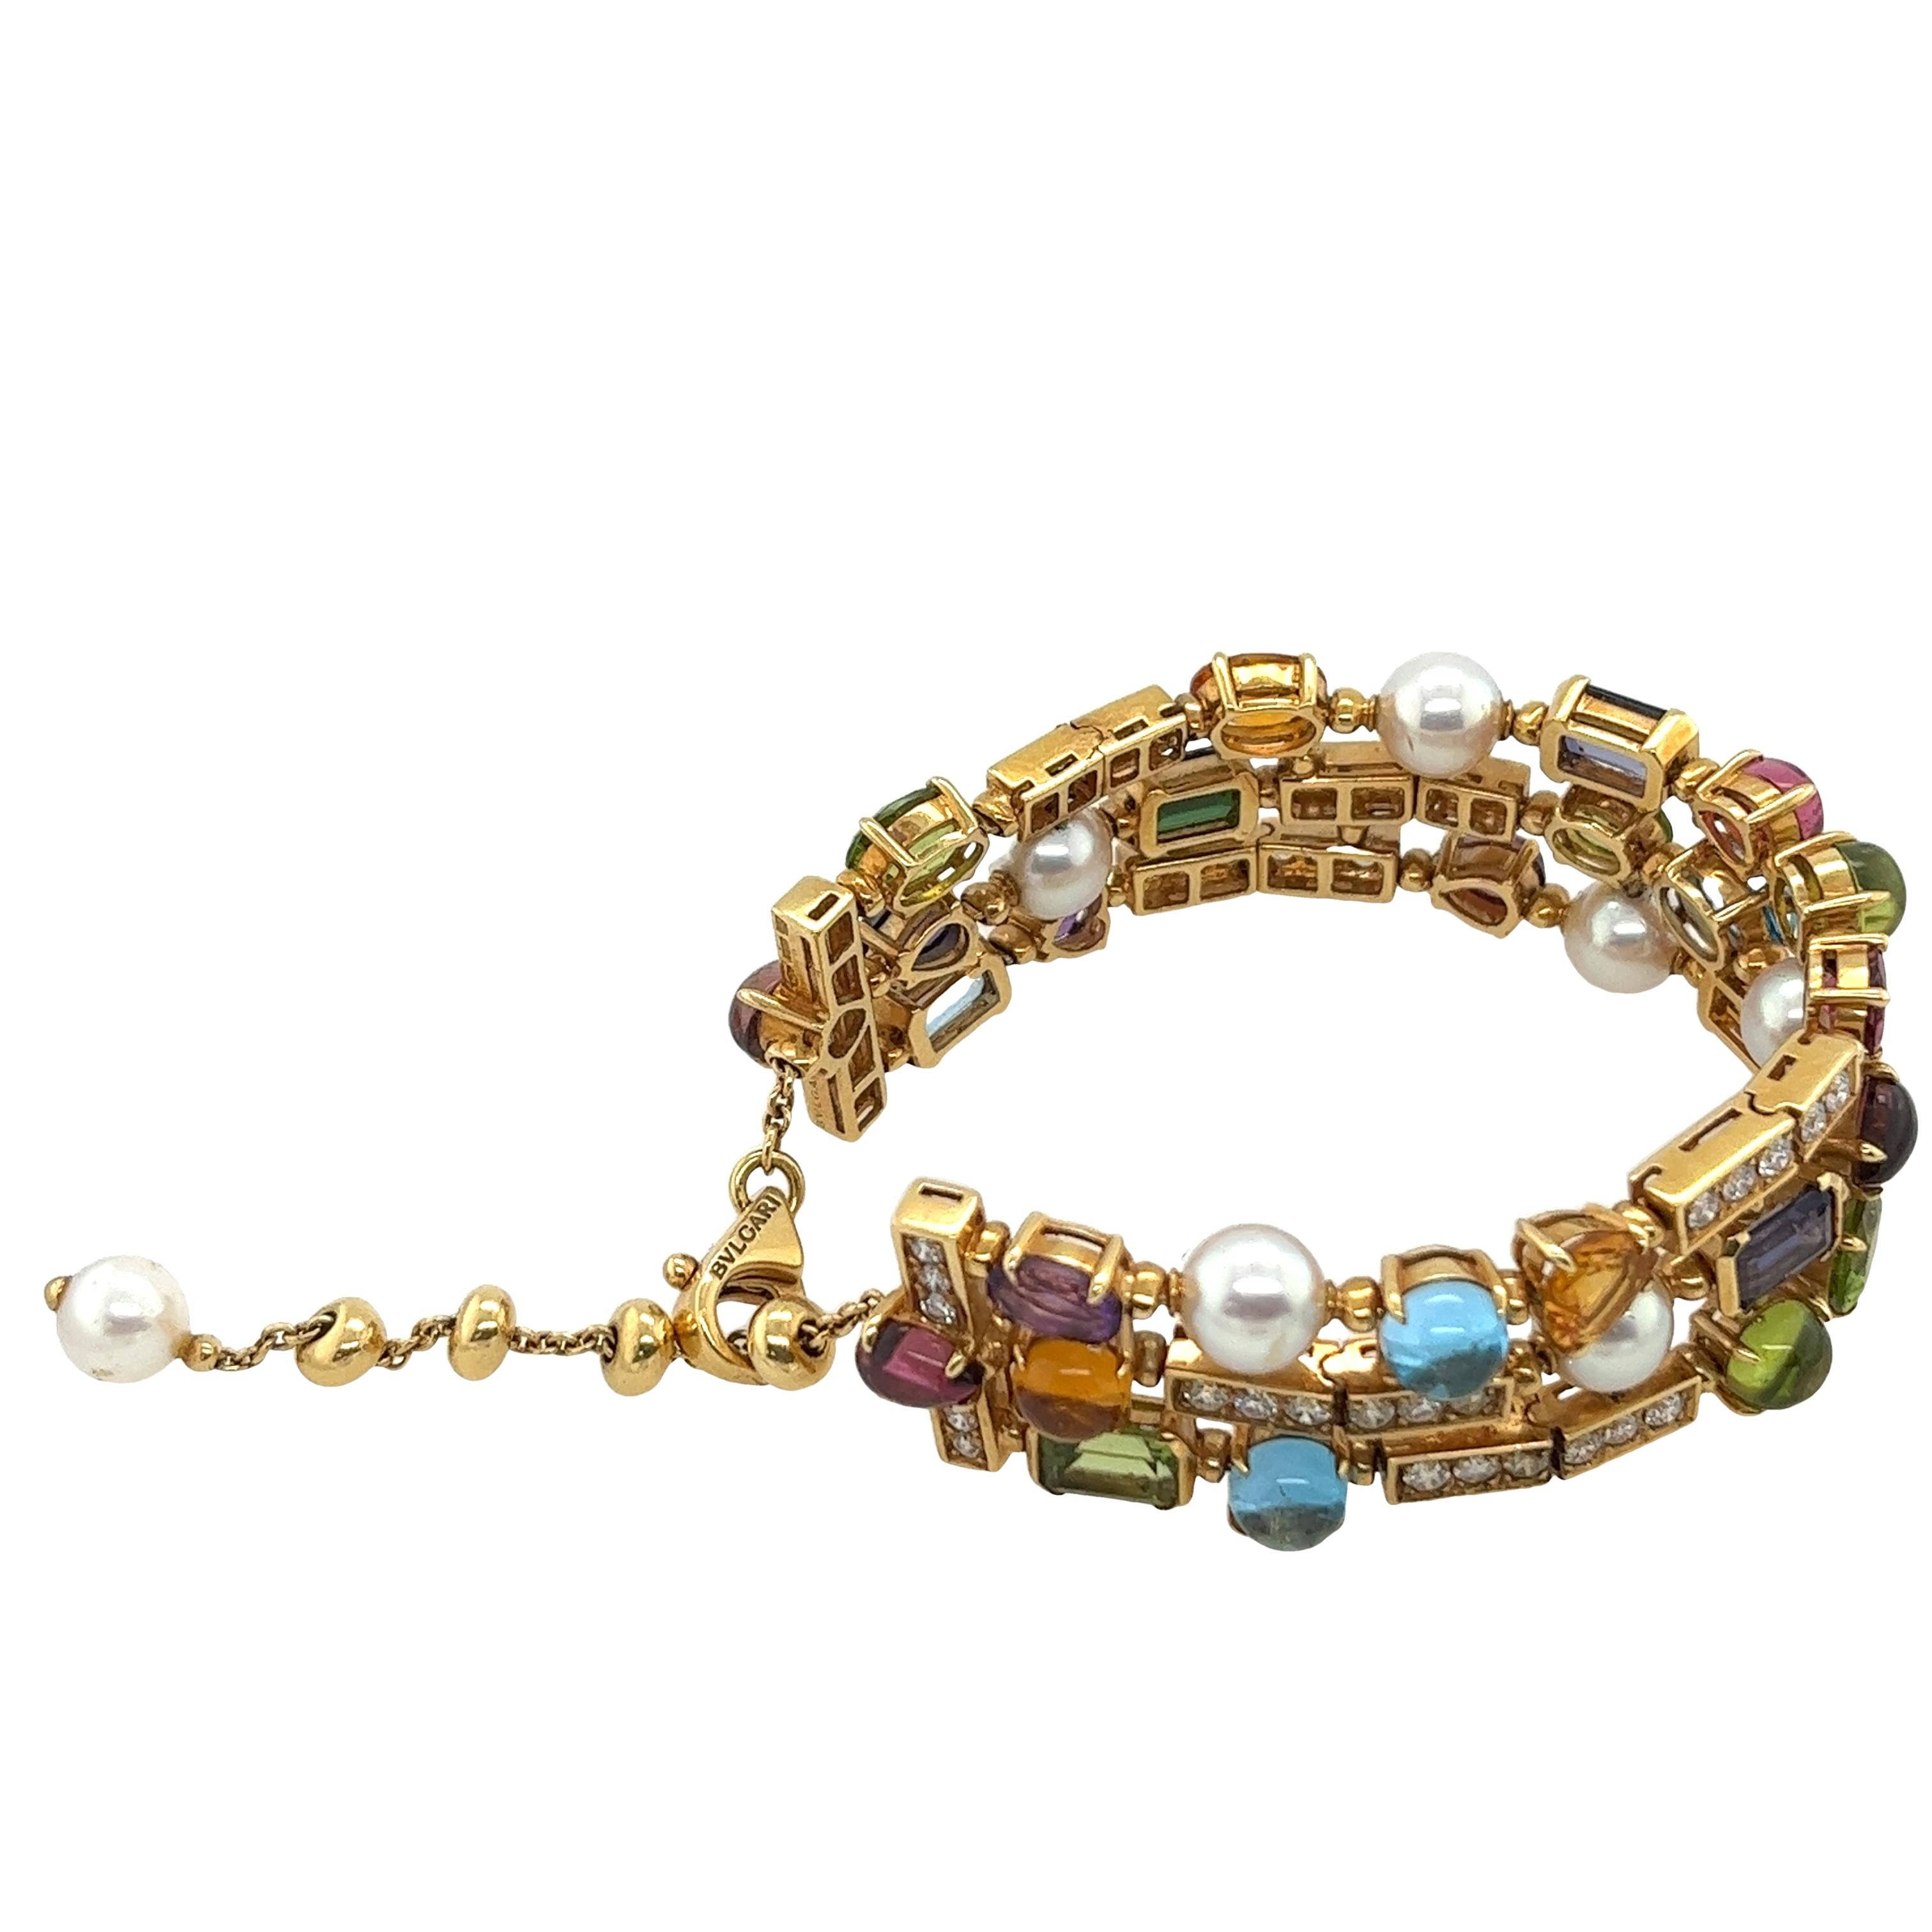 Rare Bvlgari 18ct Yellow Gold 3-row bracelet 
set with a mix of gemstones of cultured pearl iolith, 
peridot, citrine, topaz, garnet
in cabochon, oval, square, pear-shaped cut.
Surrounded by 1.80ct round brilliant cut diamonds in pave